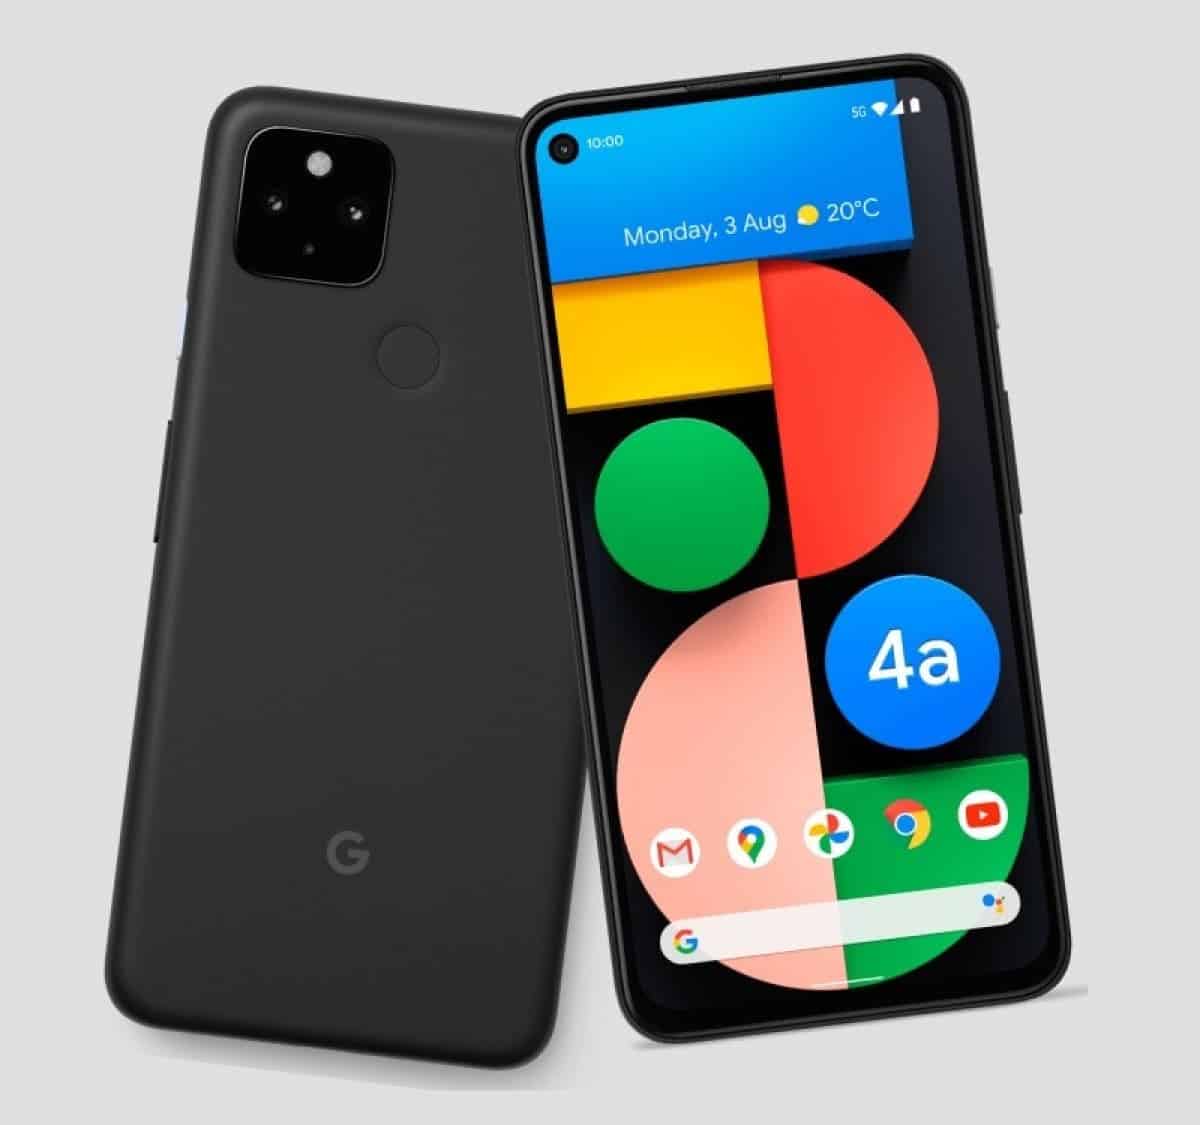 DxOMark: Google Pixel 4a performed admirably for a single-camera device